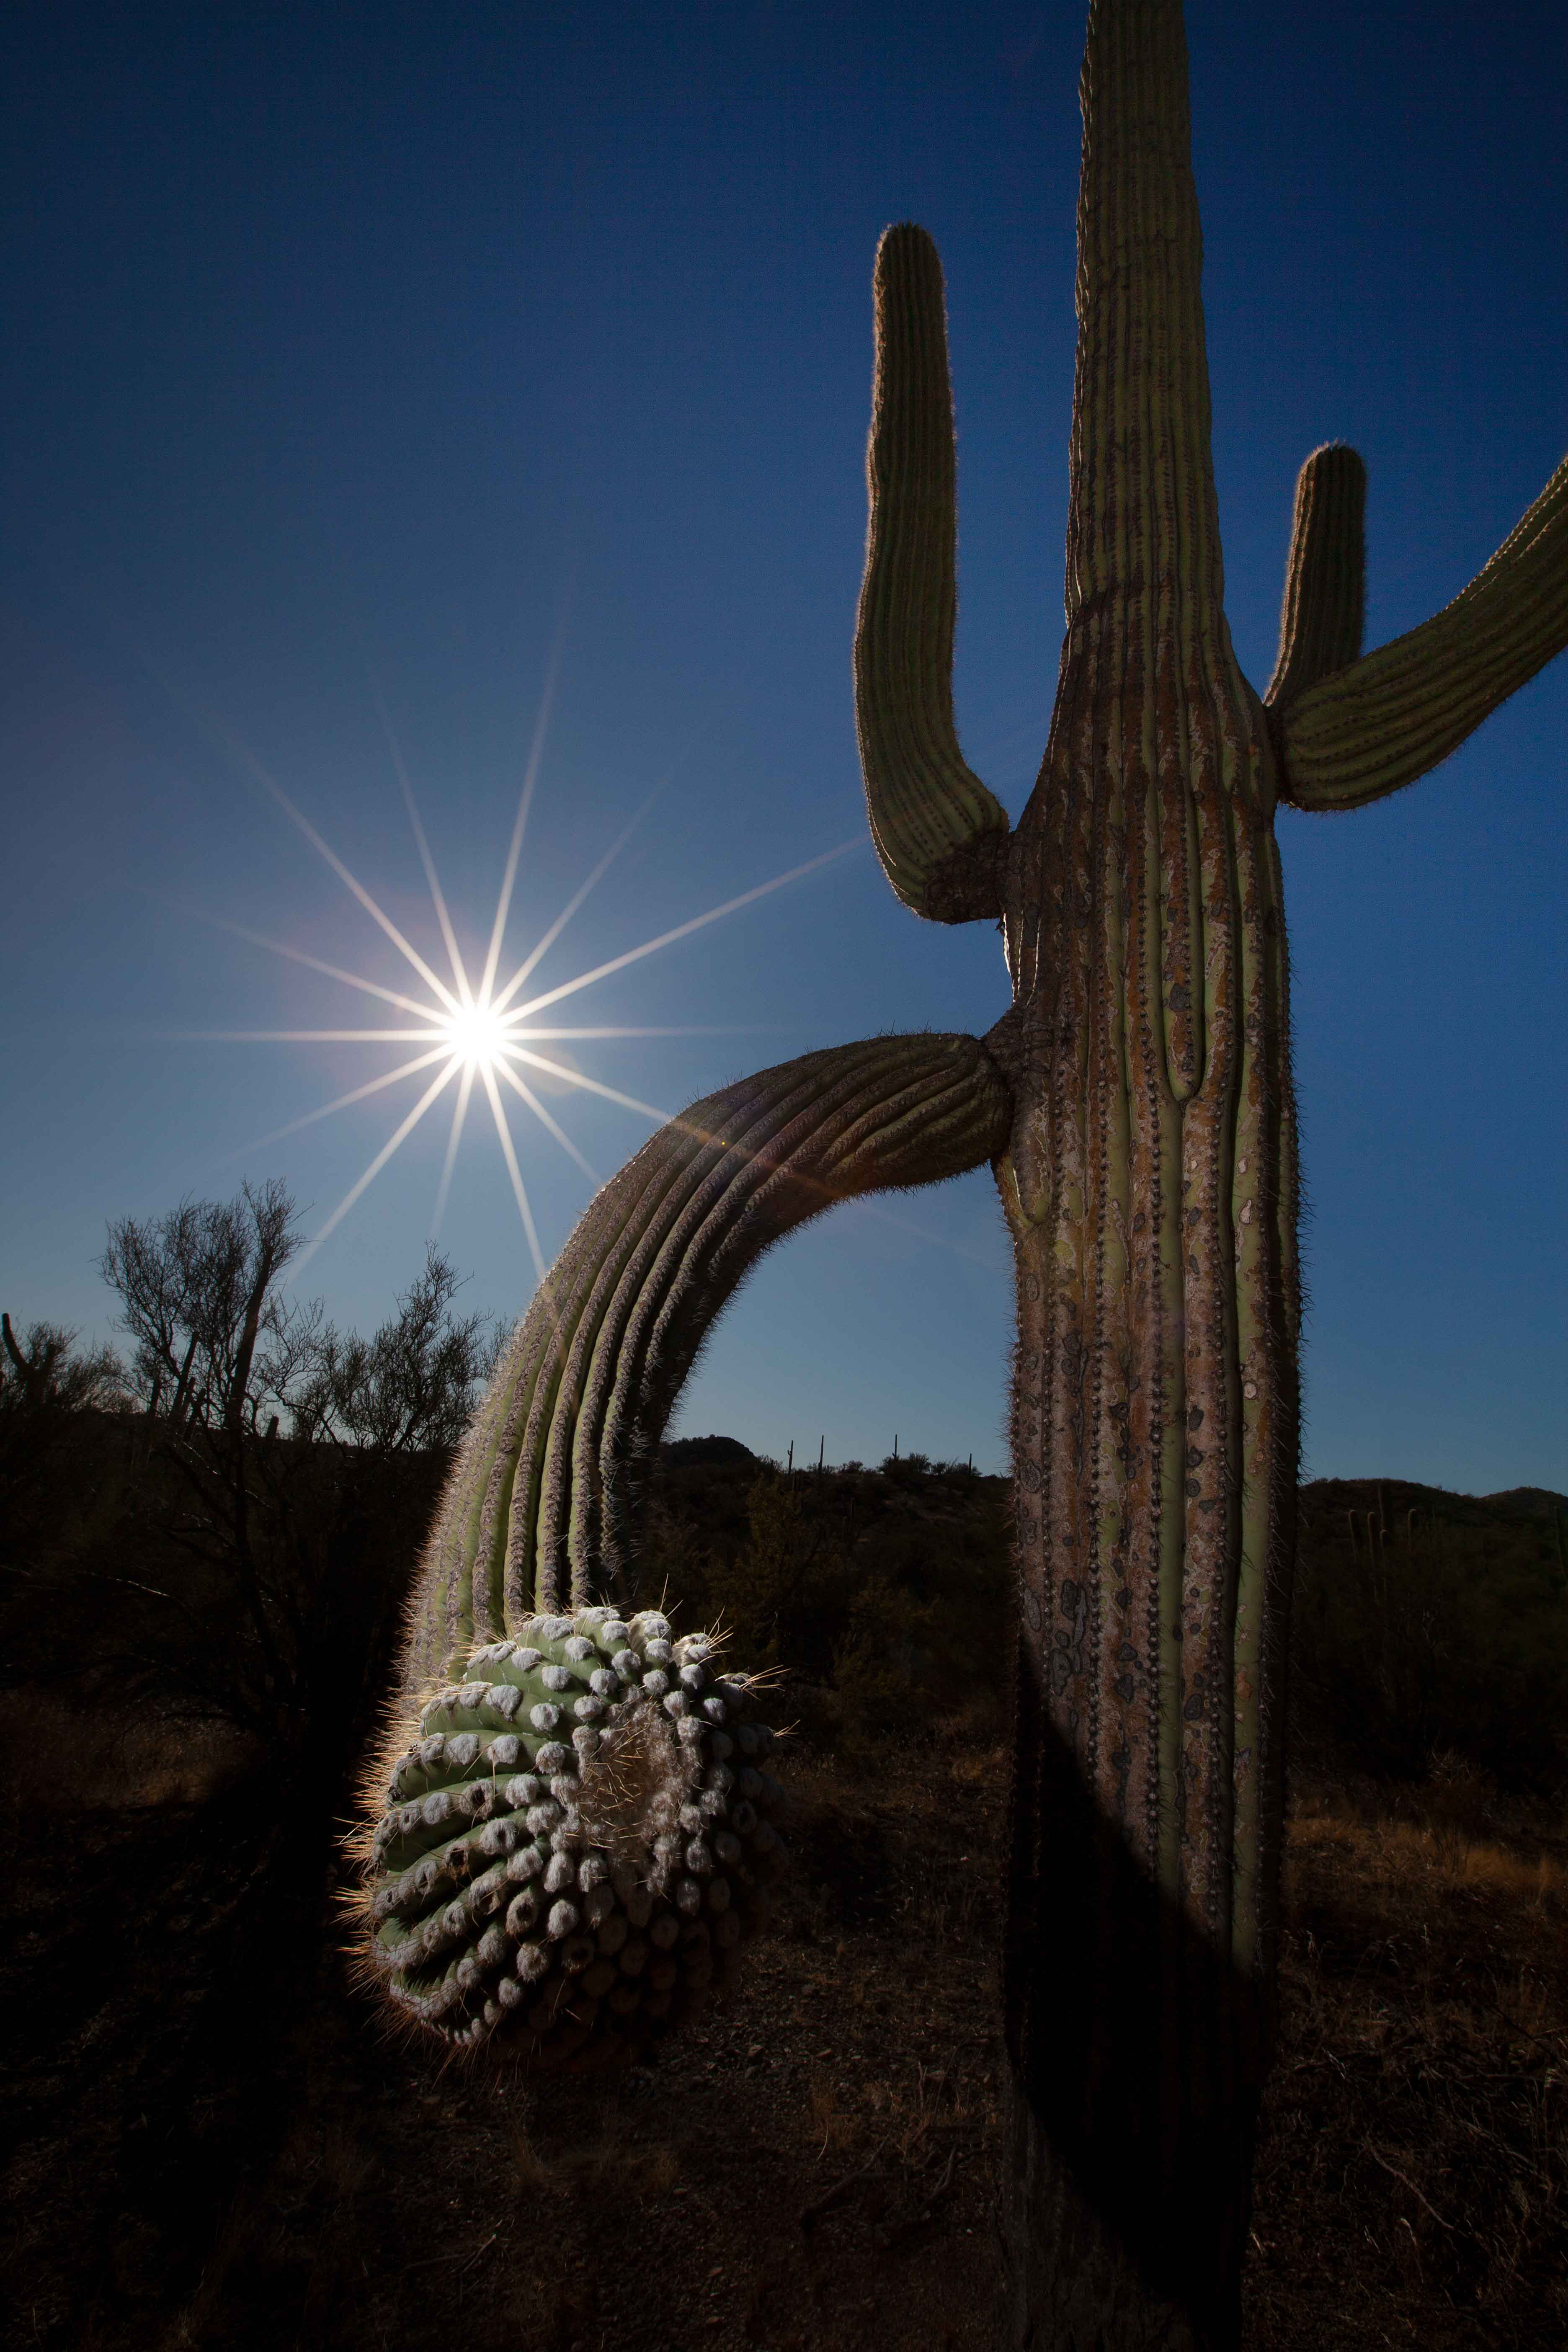 Saguaro cactus in the Superstition Mts. in the Arizona desert.